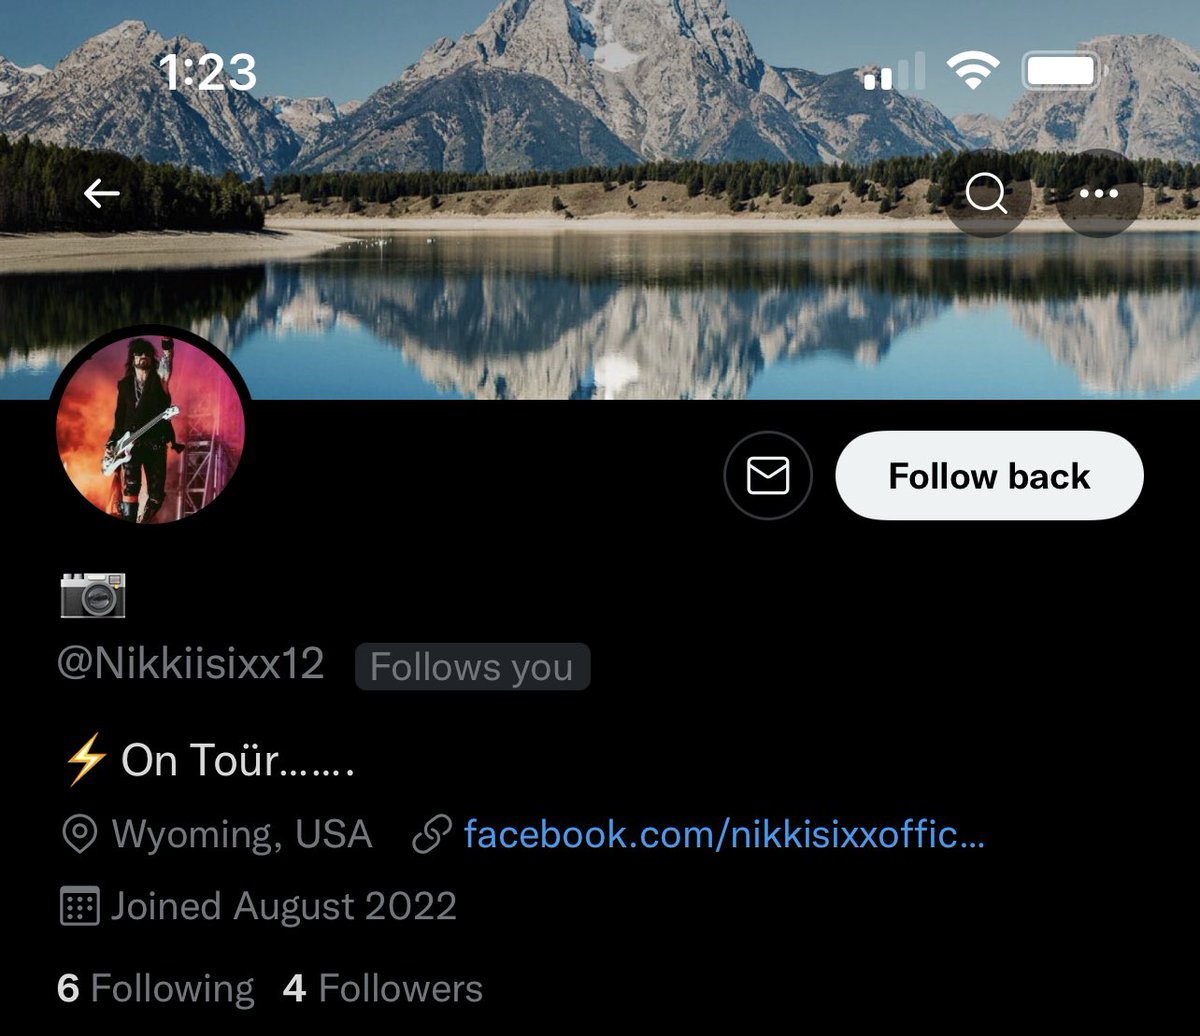 Obvious @NikkiSixx imposter! Reported and blocked 🤘🏼